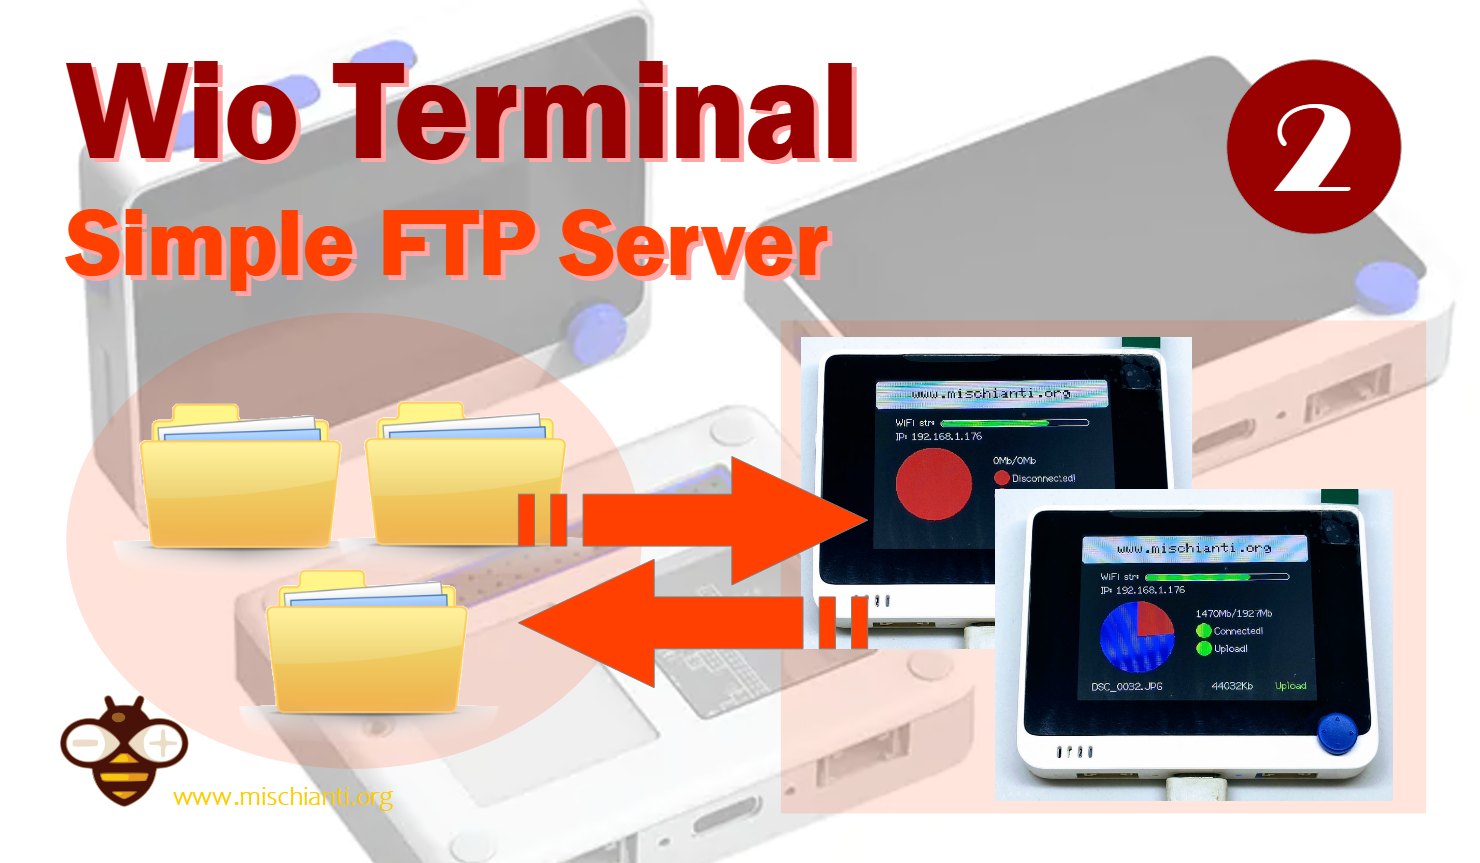 ftp from terminal